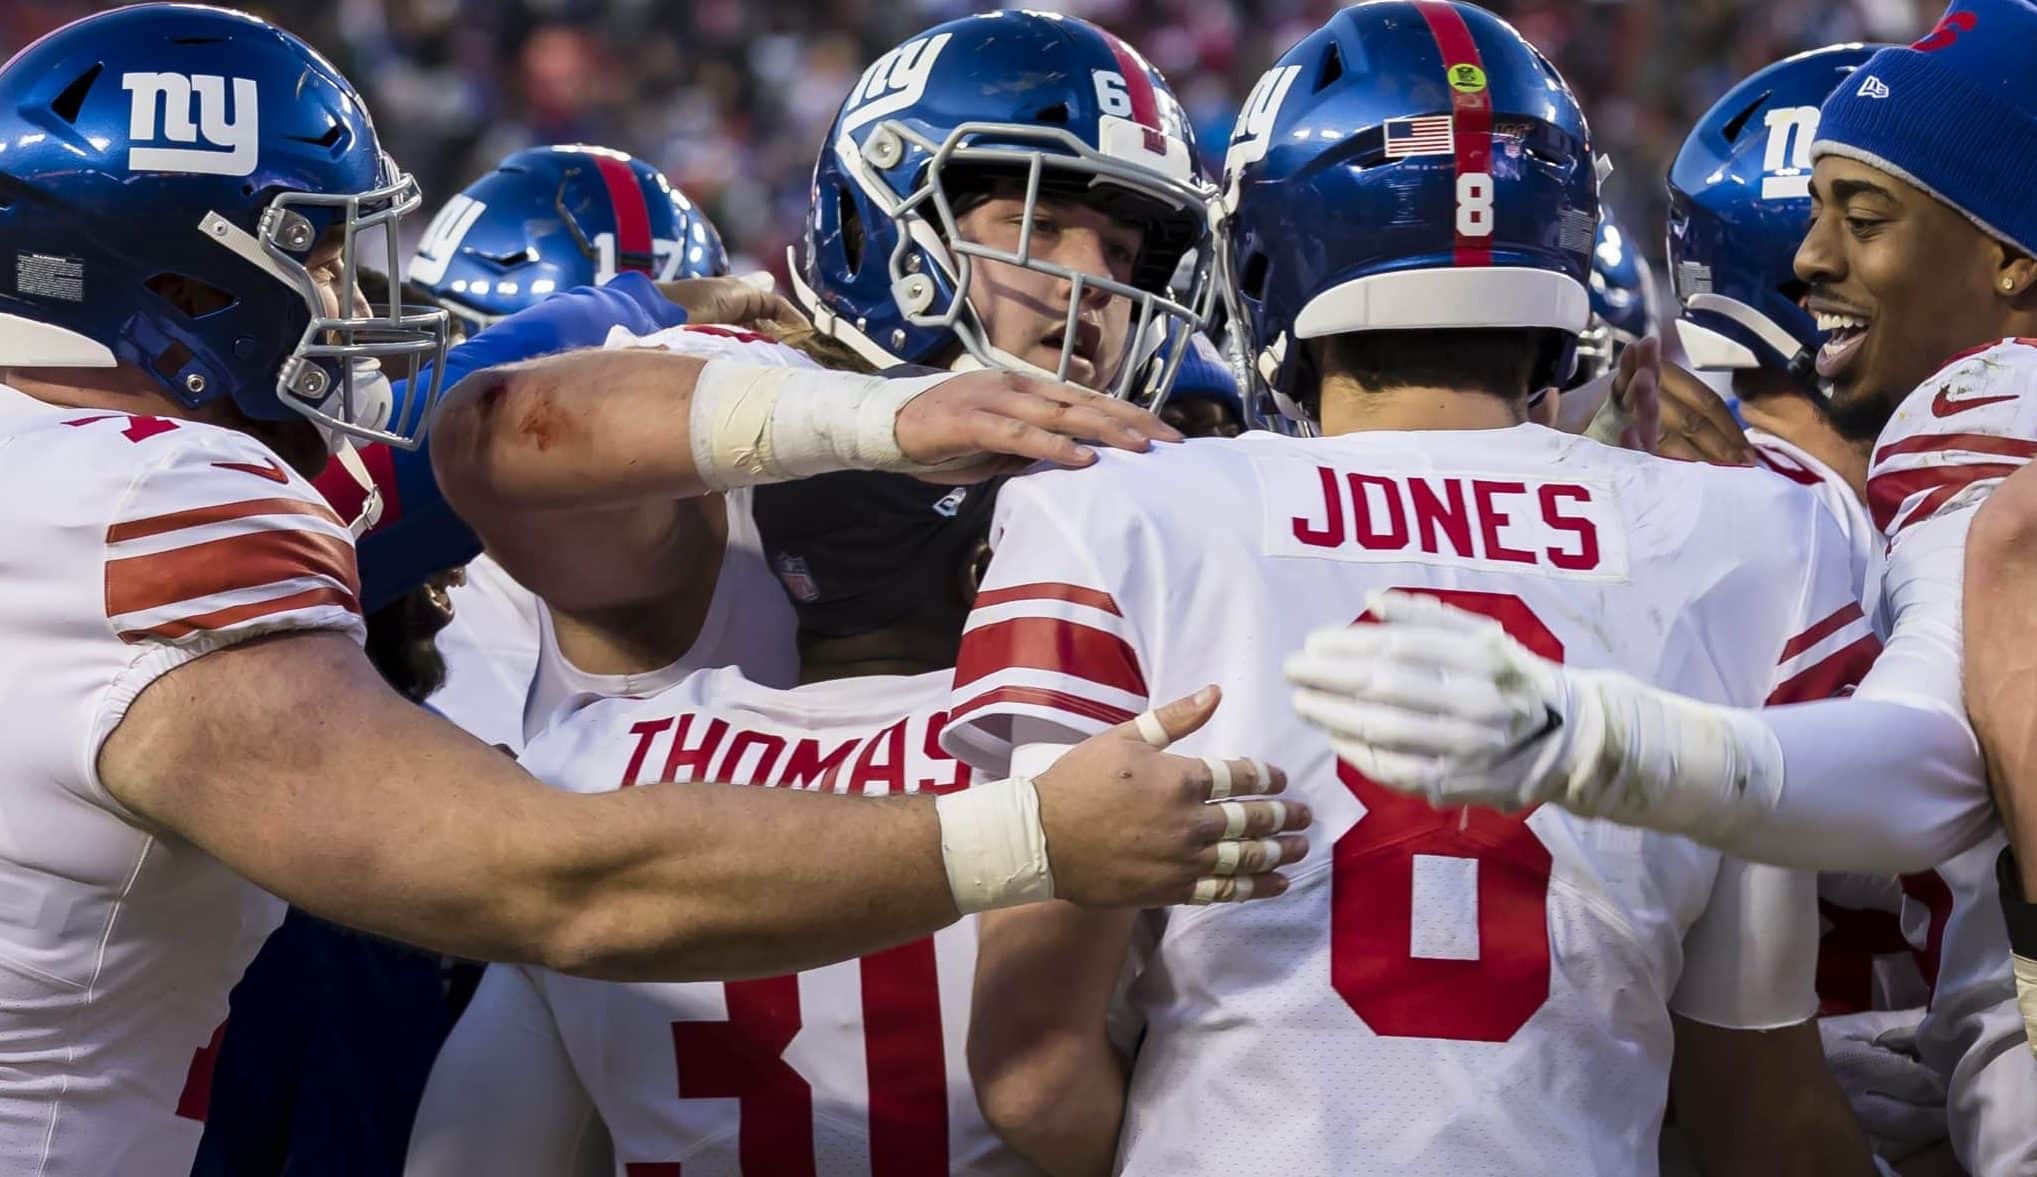 LANDOVER, MD - DECEMBER 22: Daniel Jones #8 of the New York Giants celebrates with teammates after throwing the game winning touchdown against the Washington Redskins during overtime at FedExField on December 22, 2019 in Landover, Maryland.